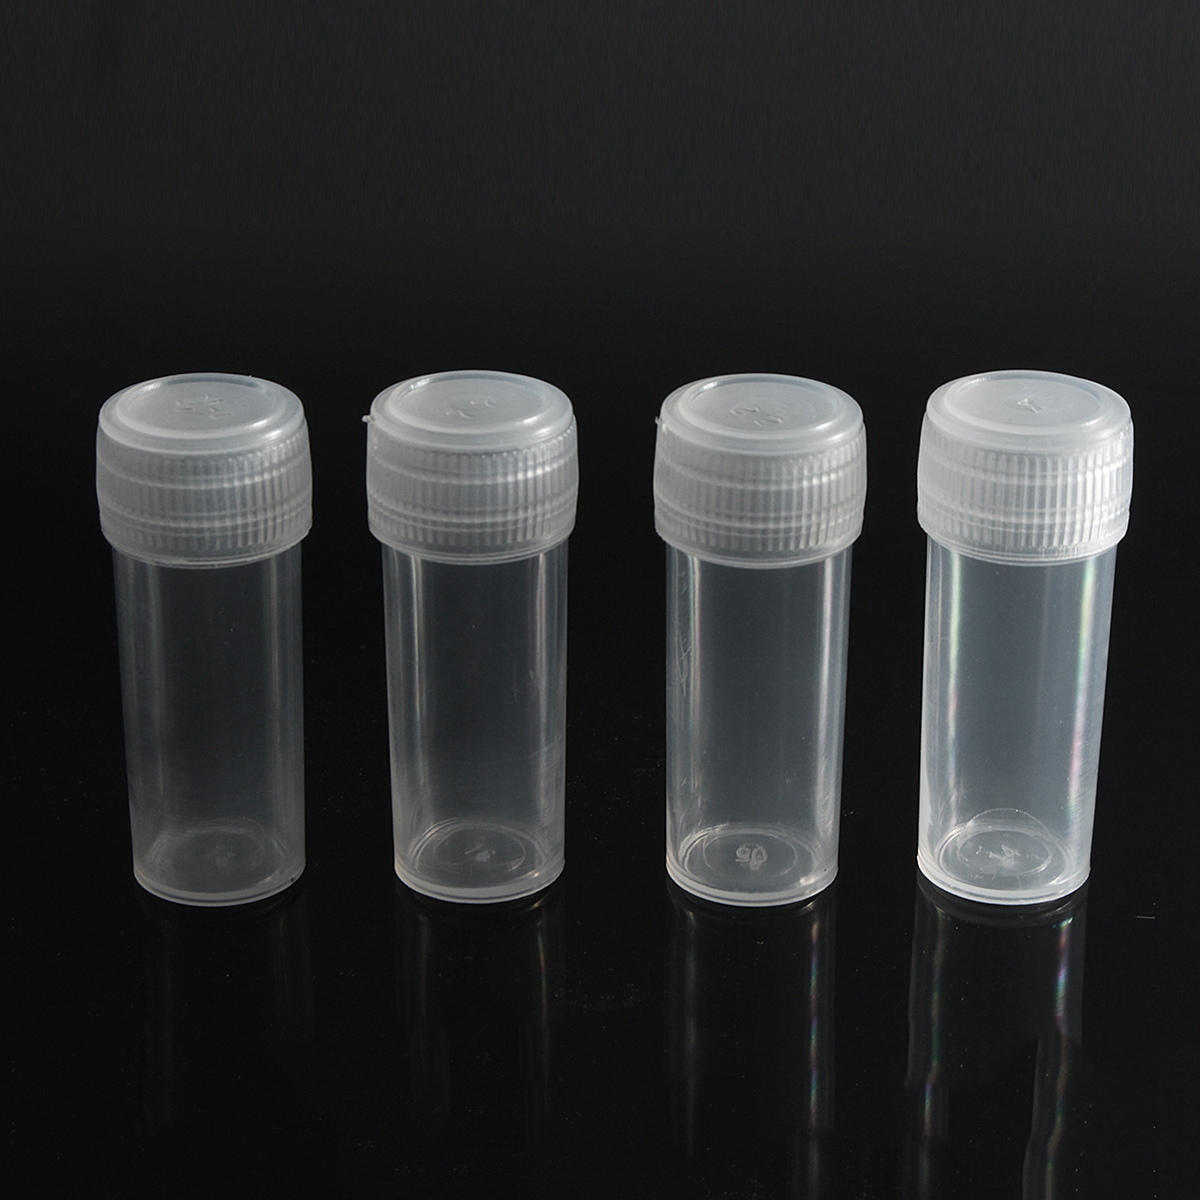 20Pcs-5ml-Chemistry-Plastic-Test-Tube-Vials-with-Seal-Caps-Pack-Container-1300038-4